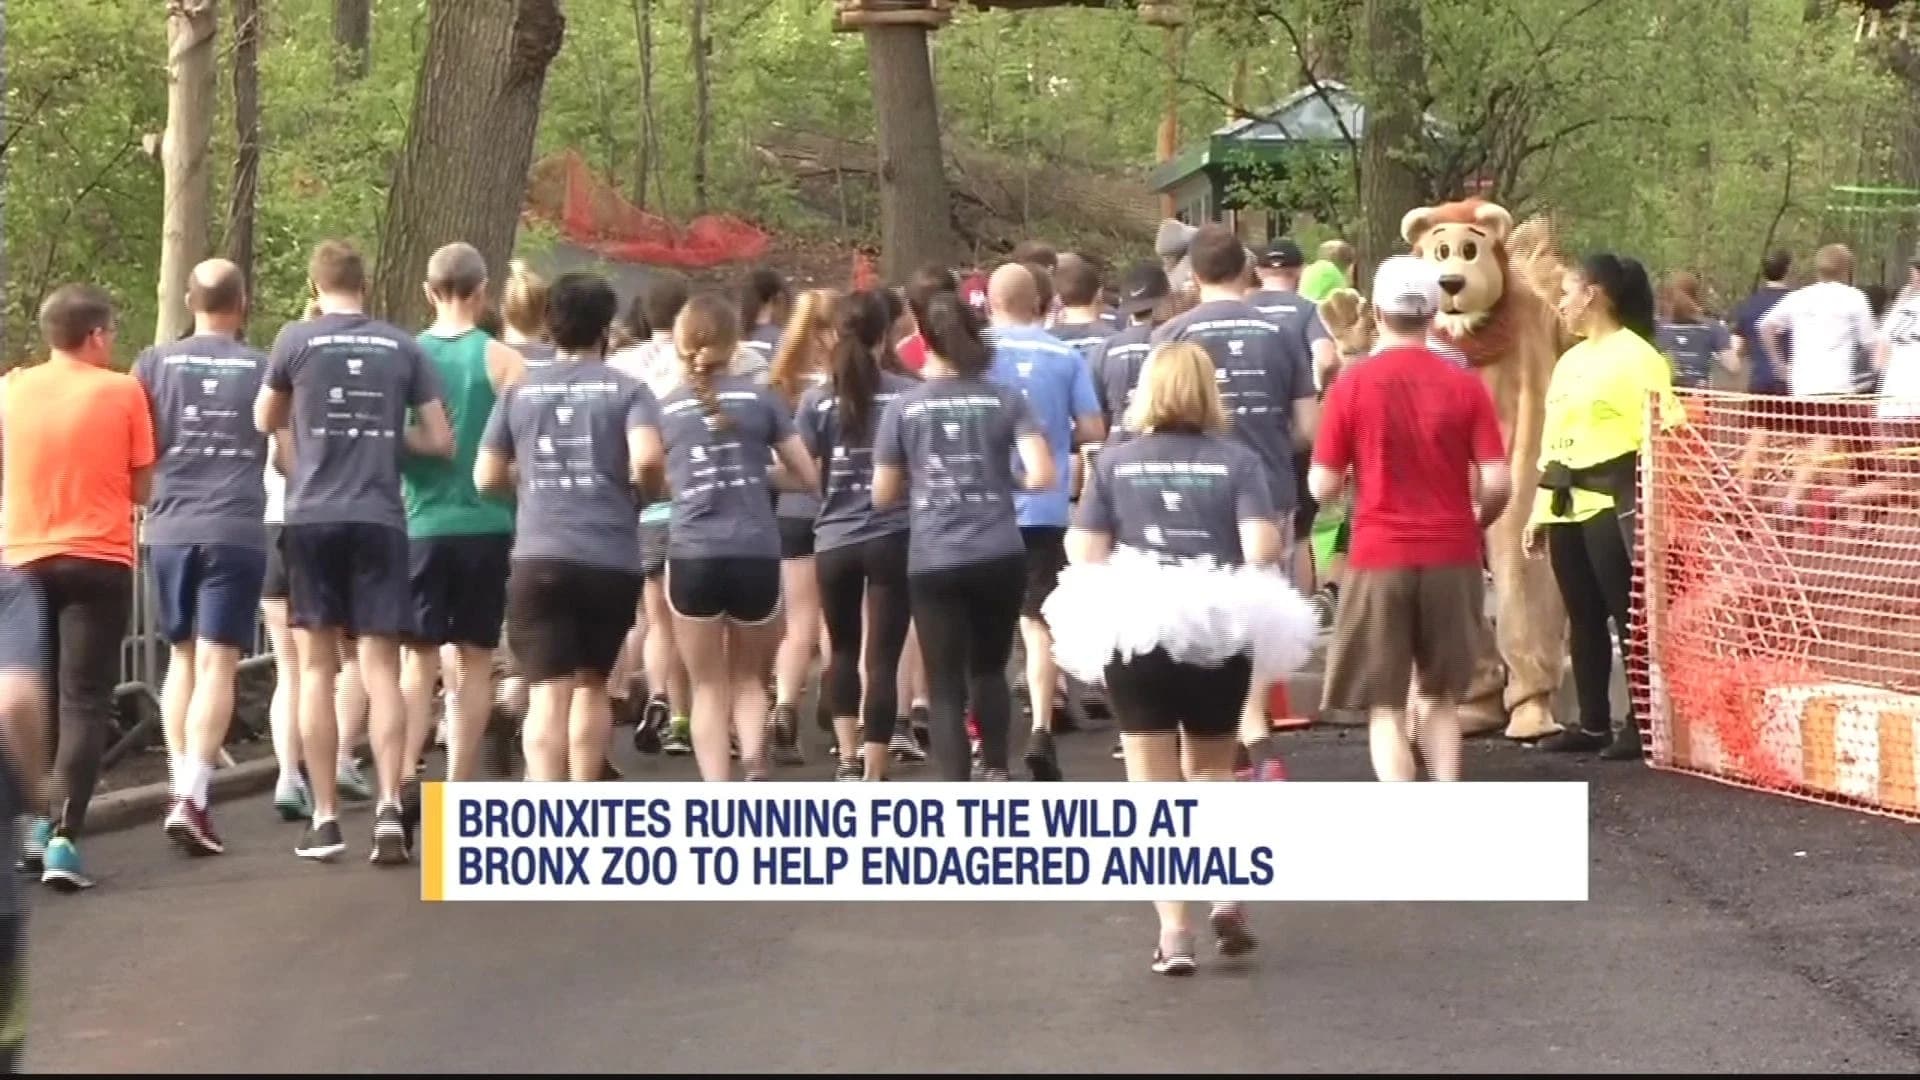 9th annual Wildlife Conservation Society 5K held at Bronx Zoo